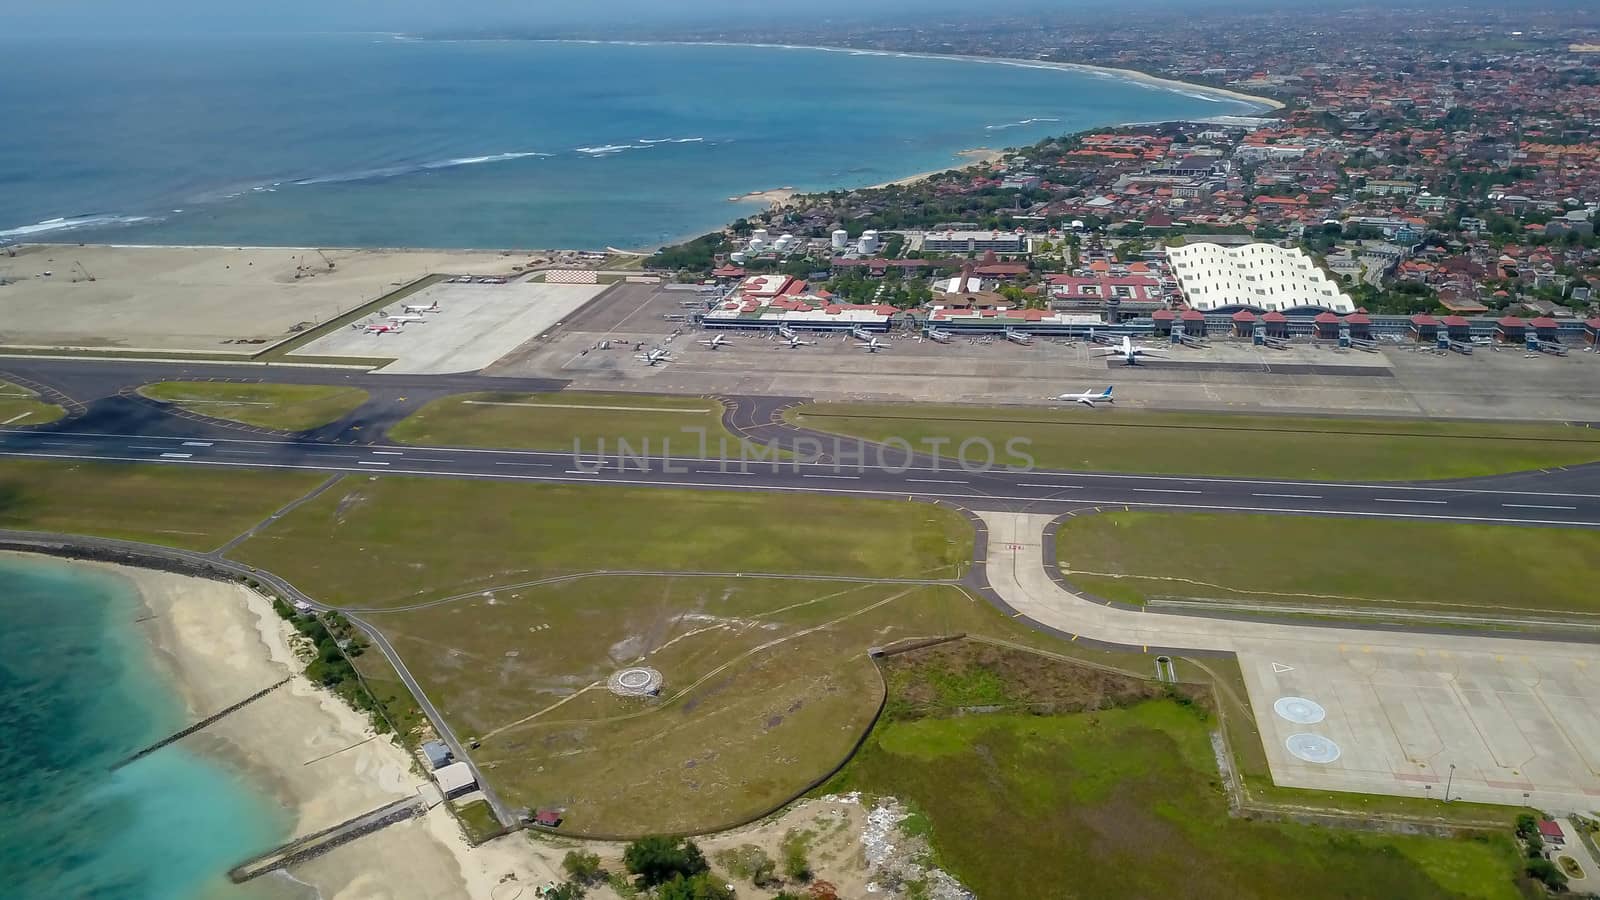 Aerial view of the runway from the top of the tower of the international airport controls Bali with a parked plane and several planes are on the runway. Aerial view to Ngurah Rai airport, Indonesia.